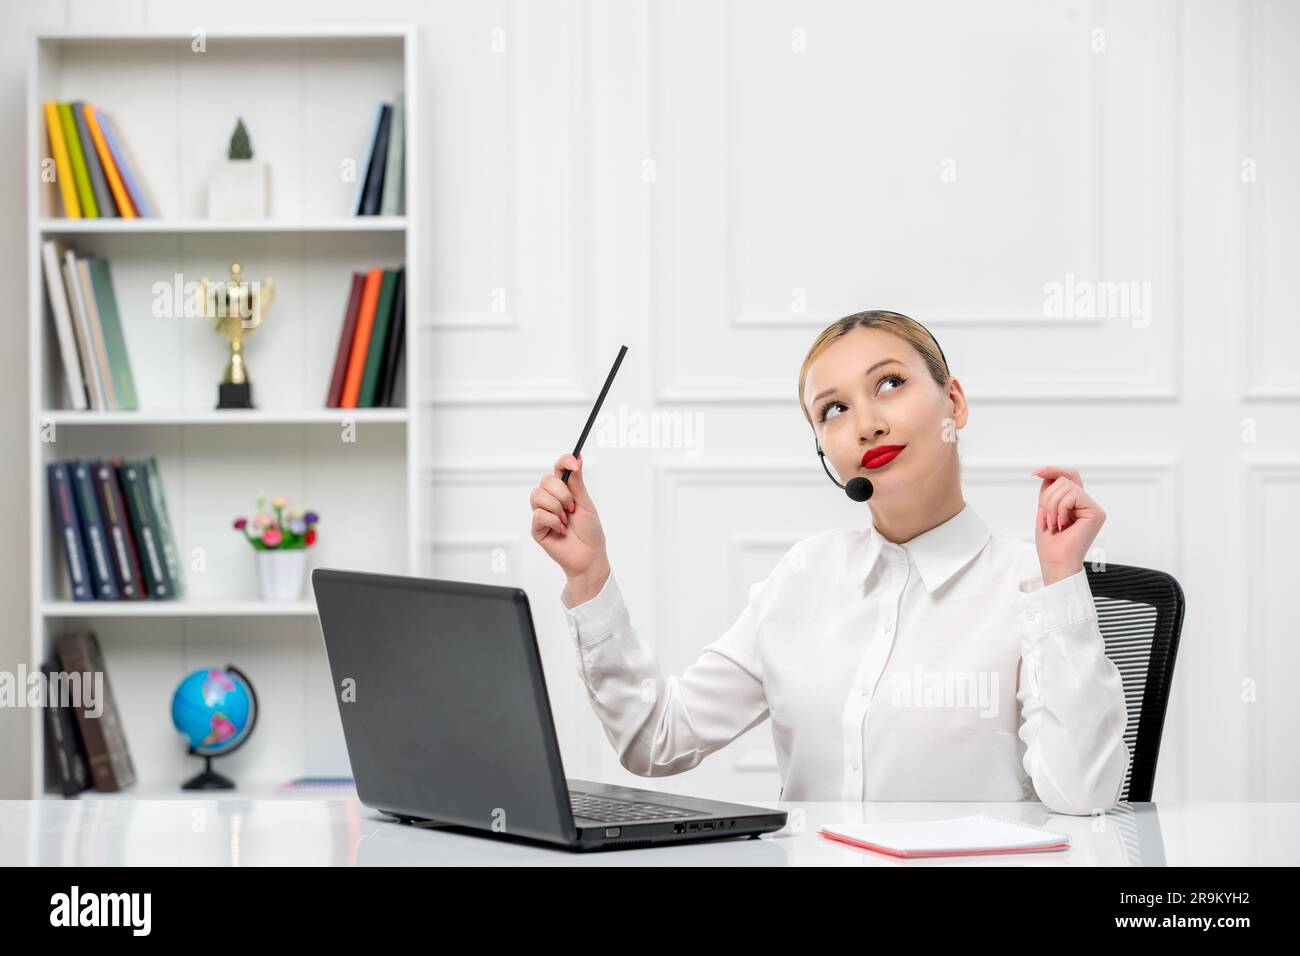 customer service cute blonde girl office shirt with headset and computer looking up Stock Photo